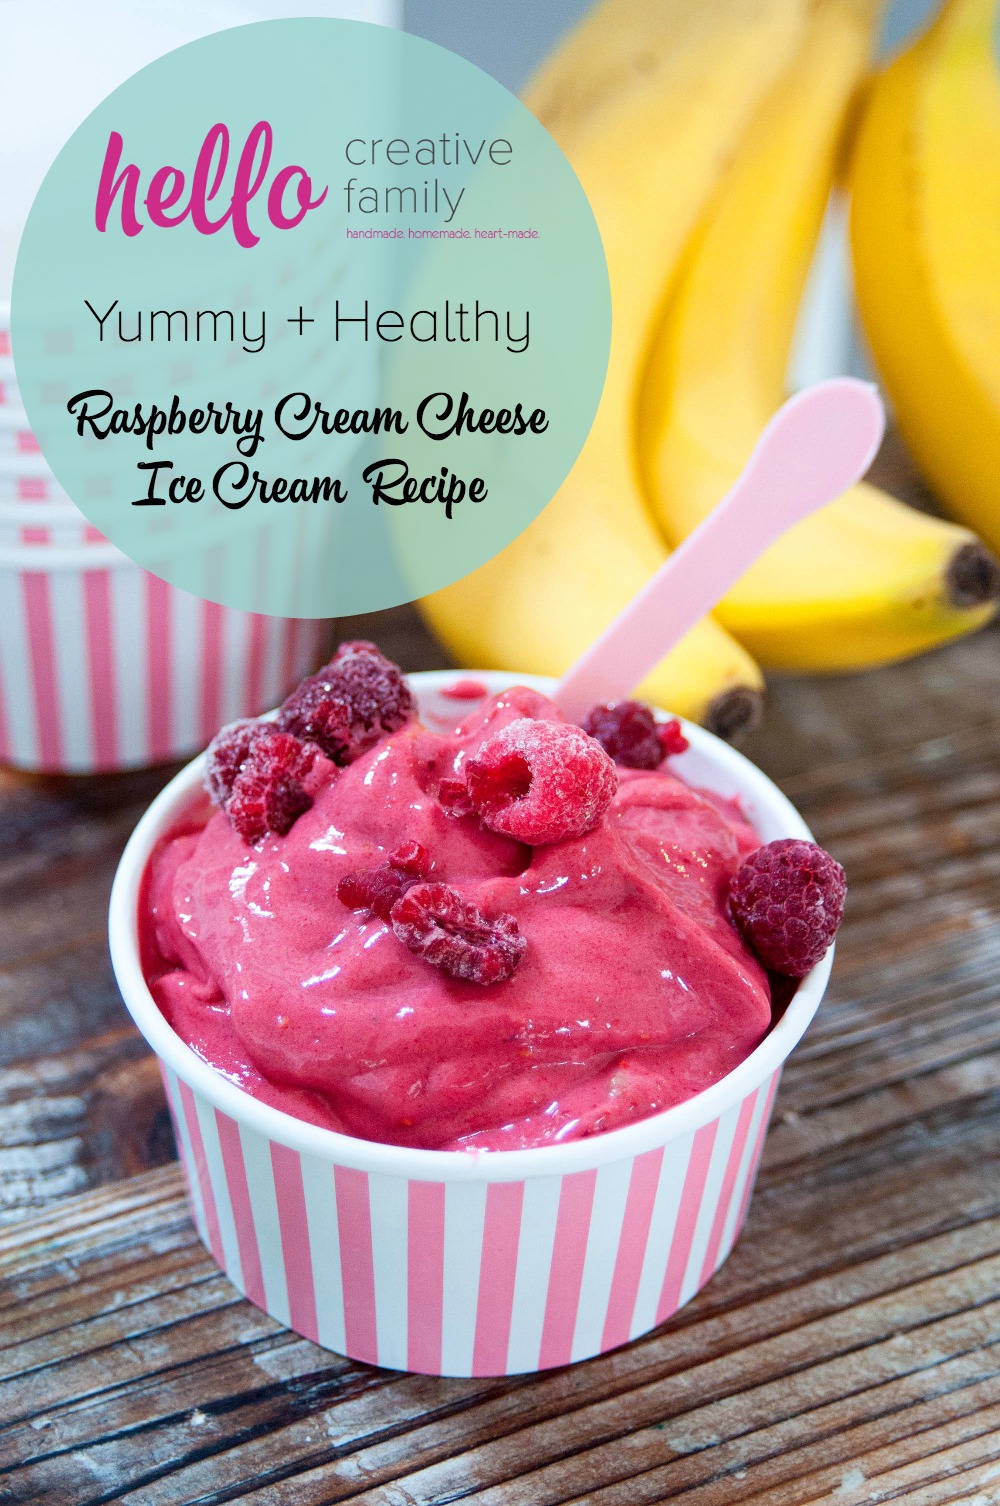 Looking for a delicious summer treat that is good for the waistline? Check out this Healthy Raspberry Cream Cheese Ice Cream Recipe. It takes minutes to make and is super yummy.